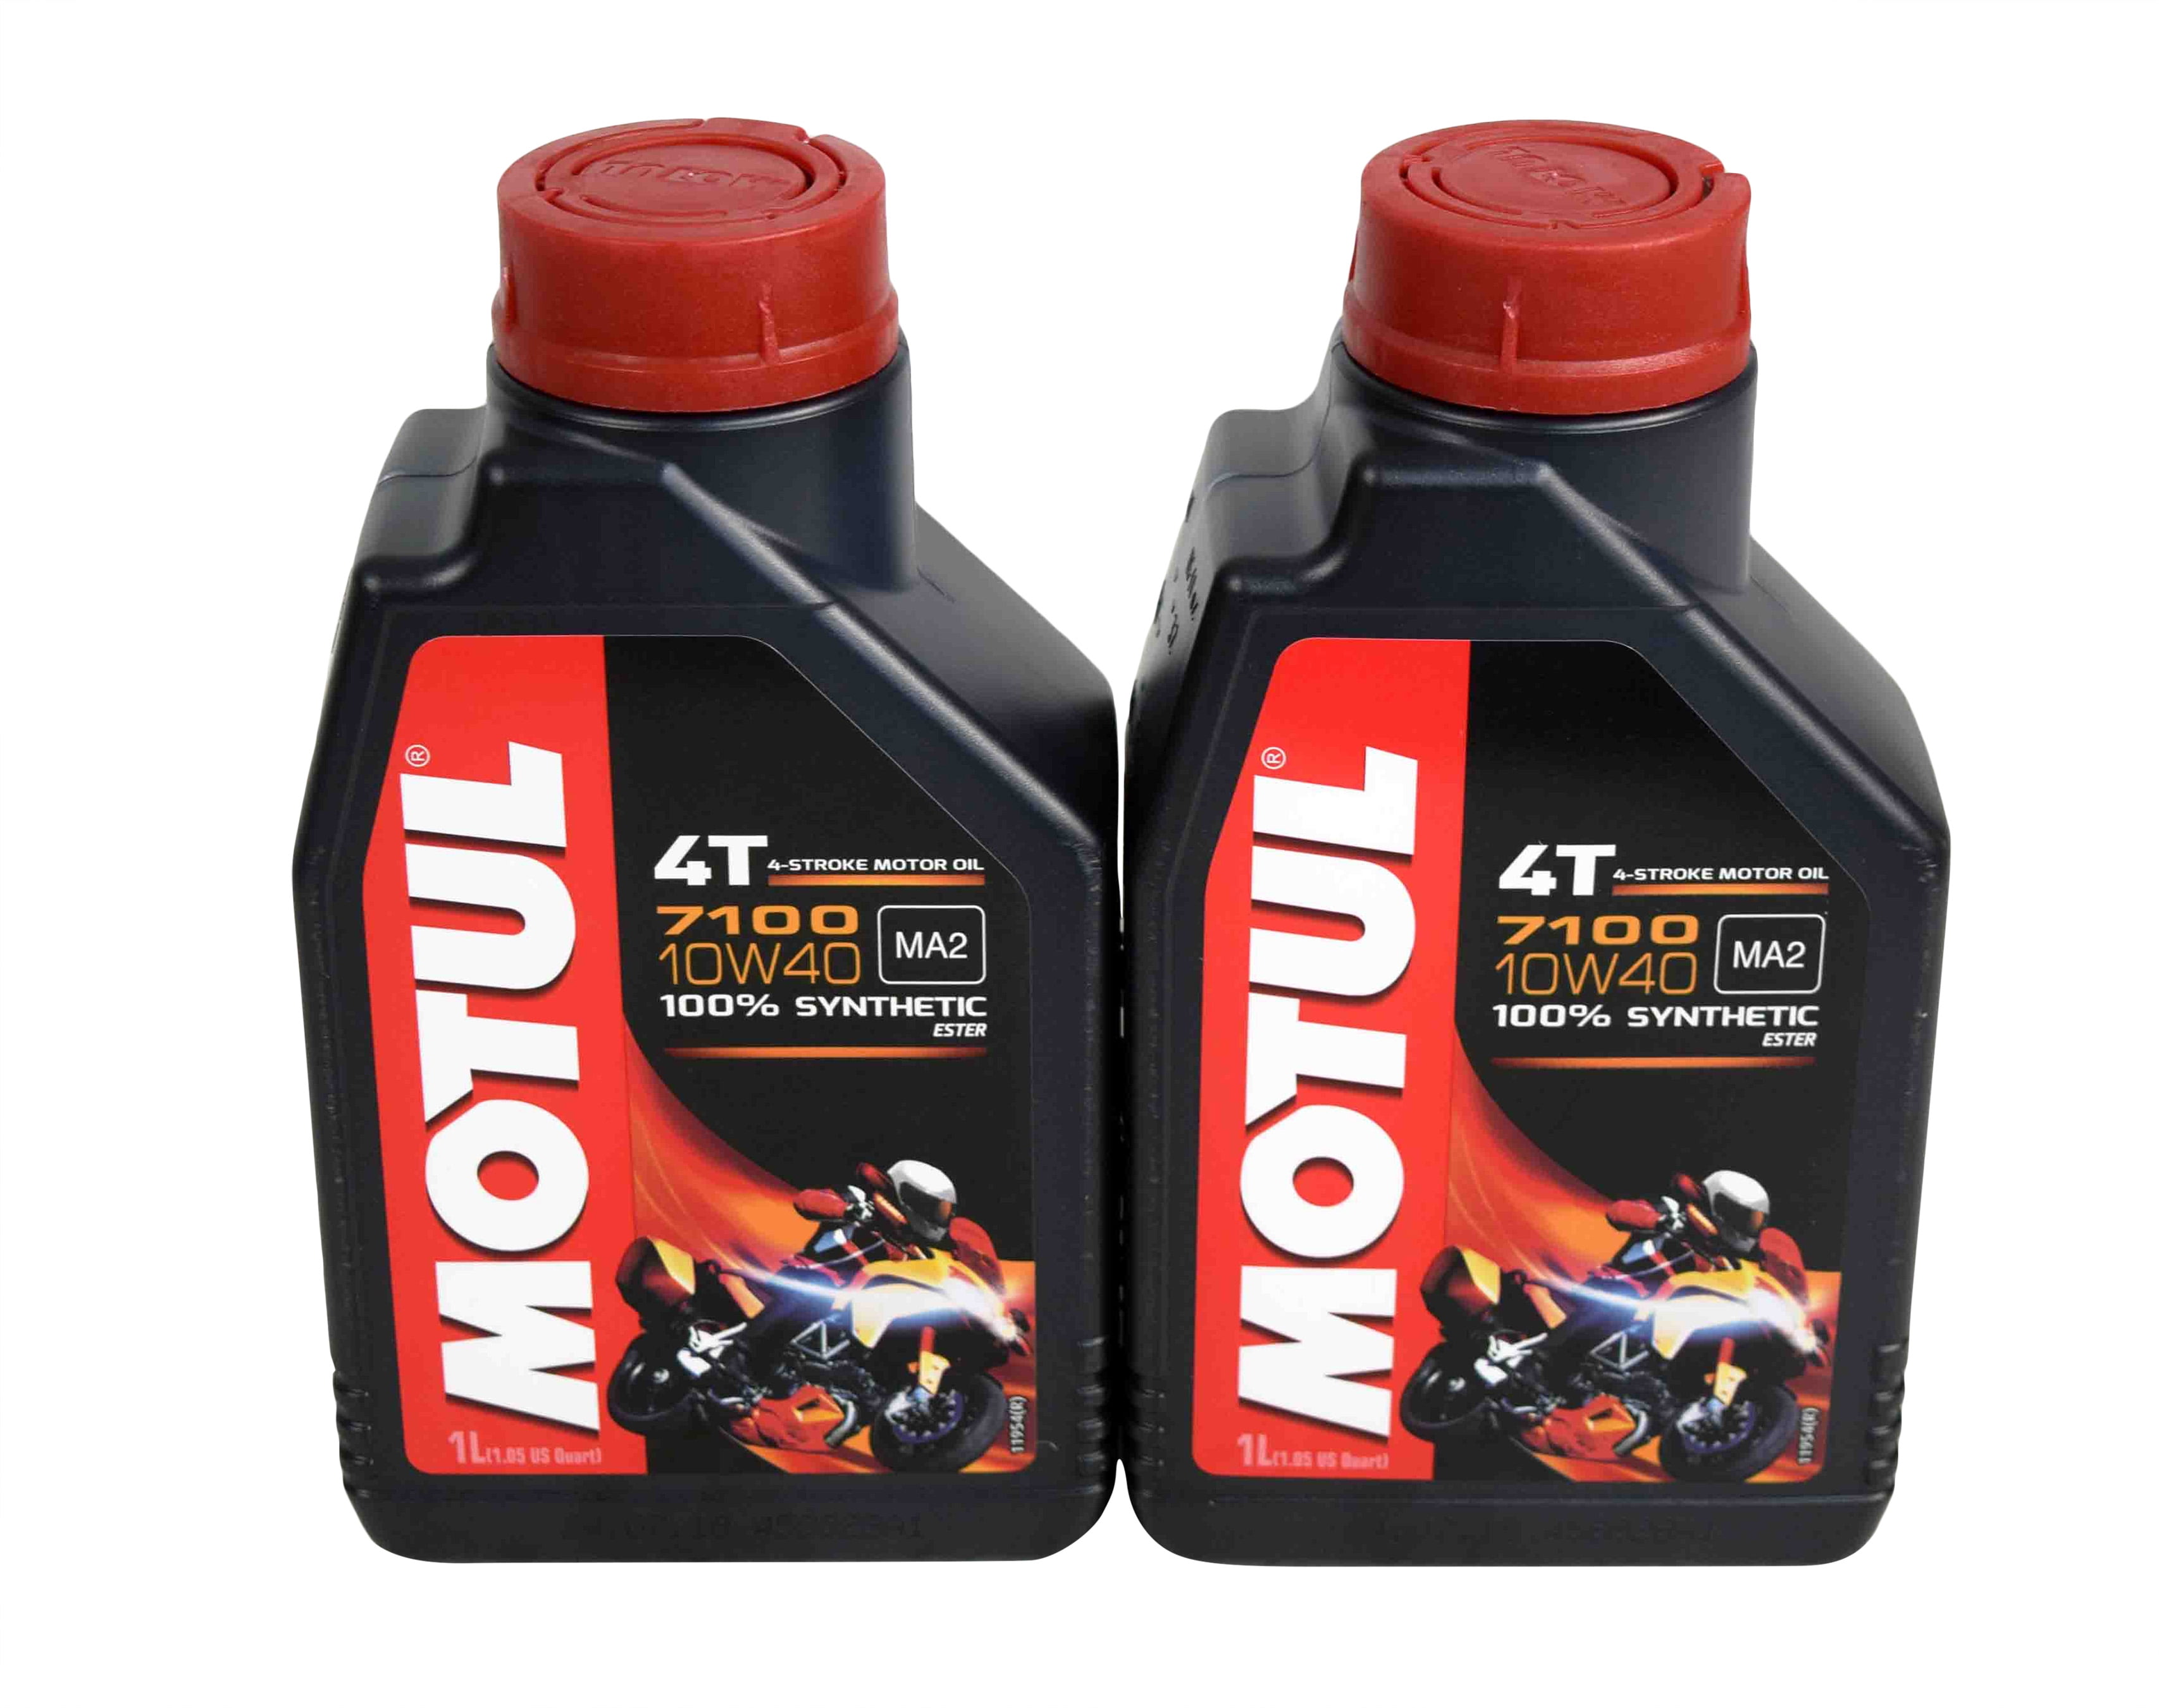 Motul 104091 7100 Ester 4T Fully Synthetic 10W40 Petrol Engine Oil (1L) 2  pack 